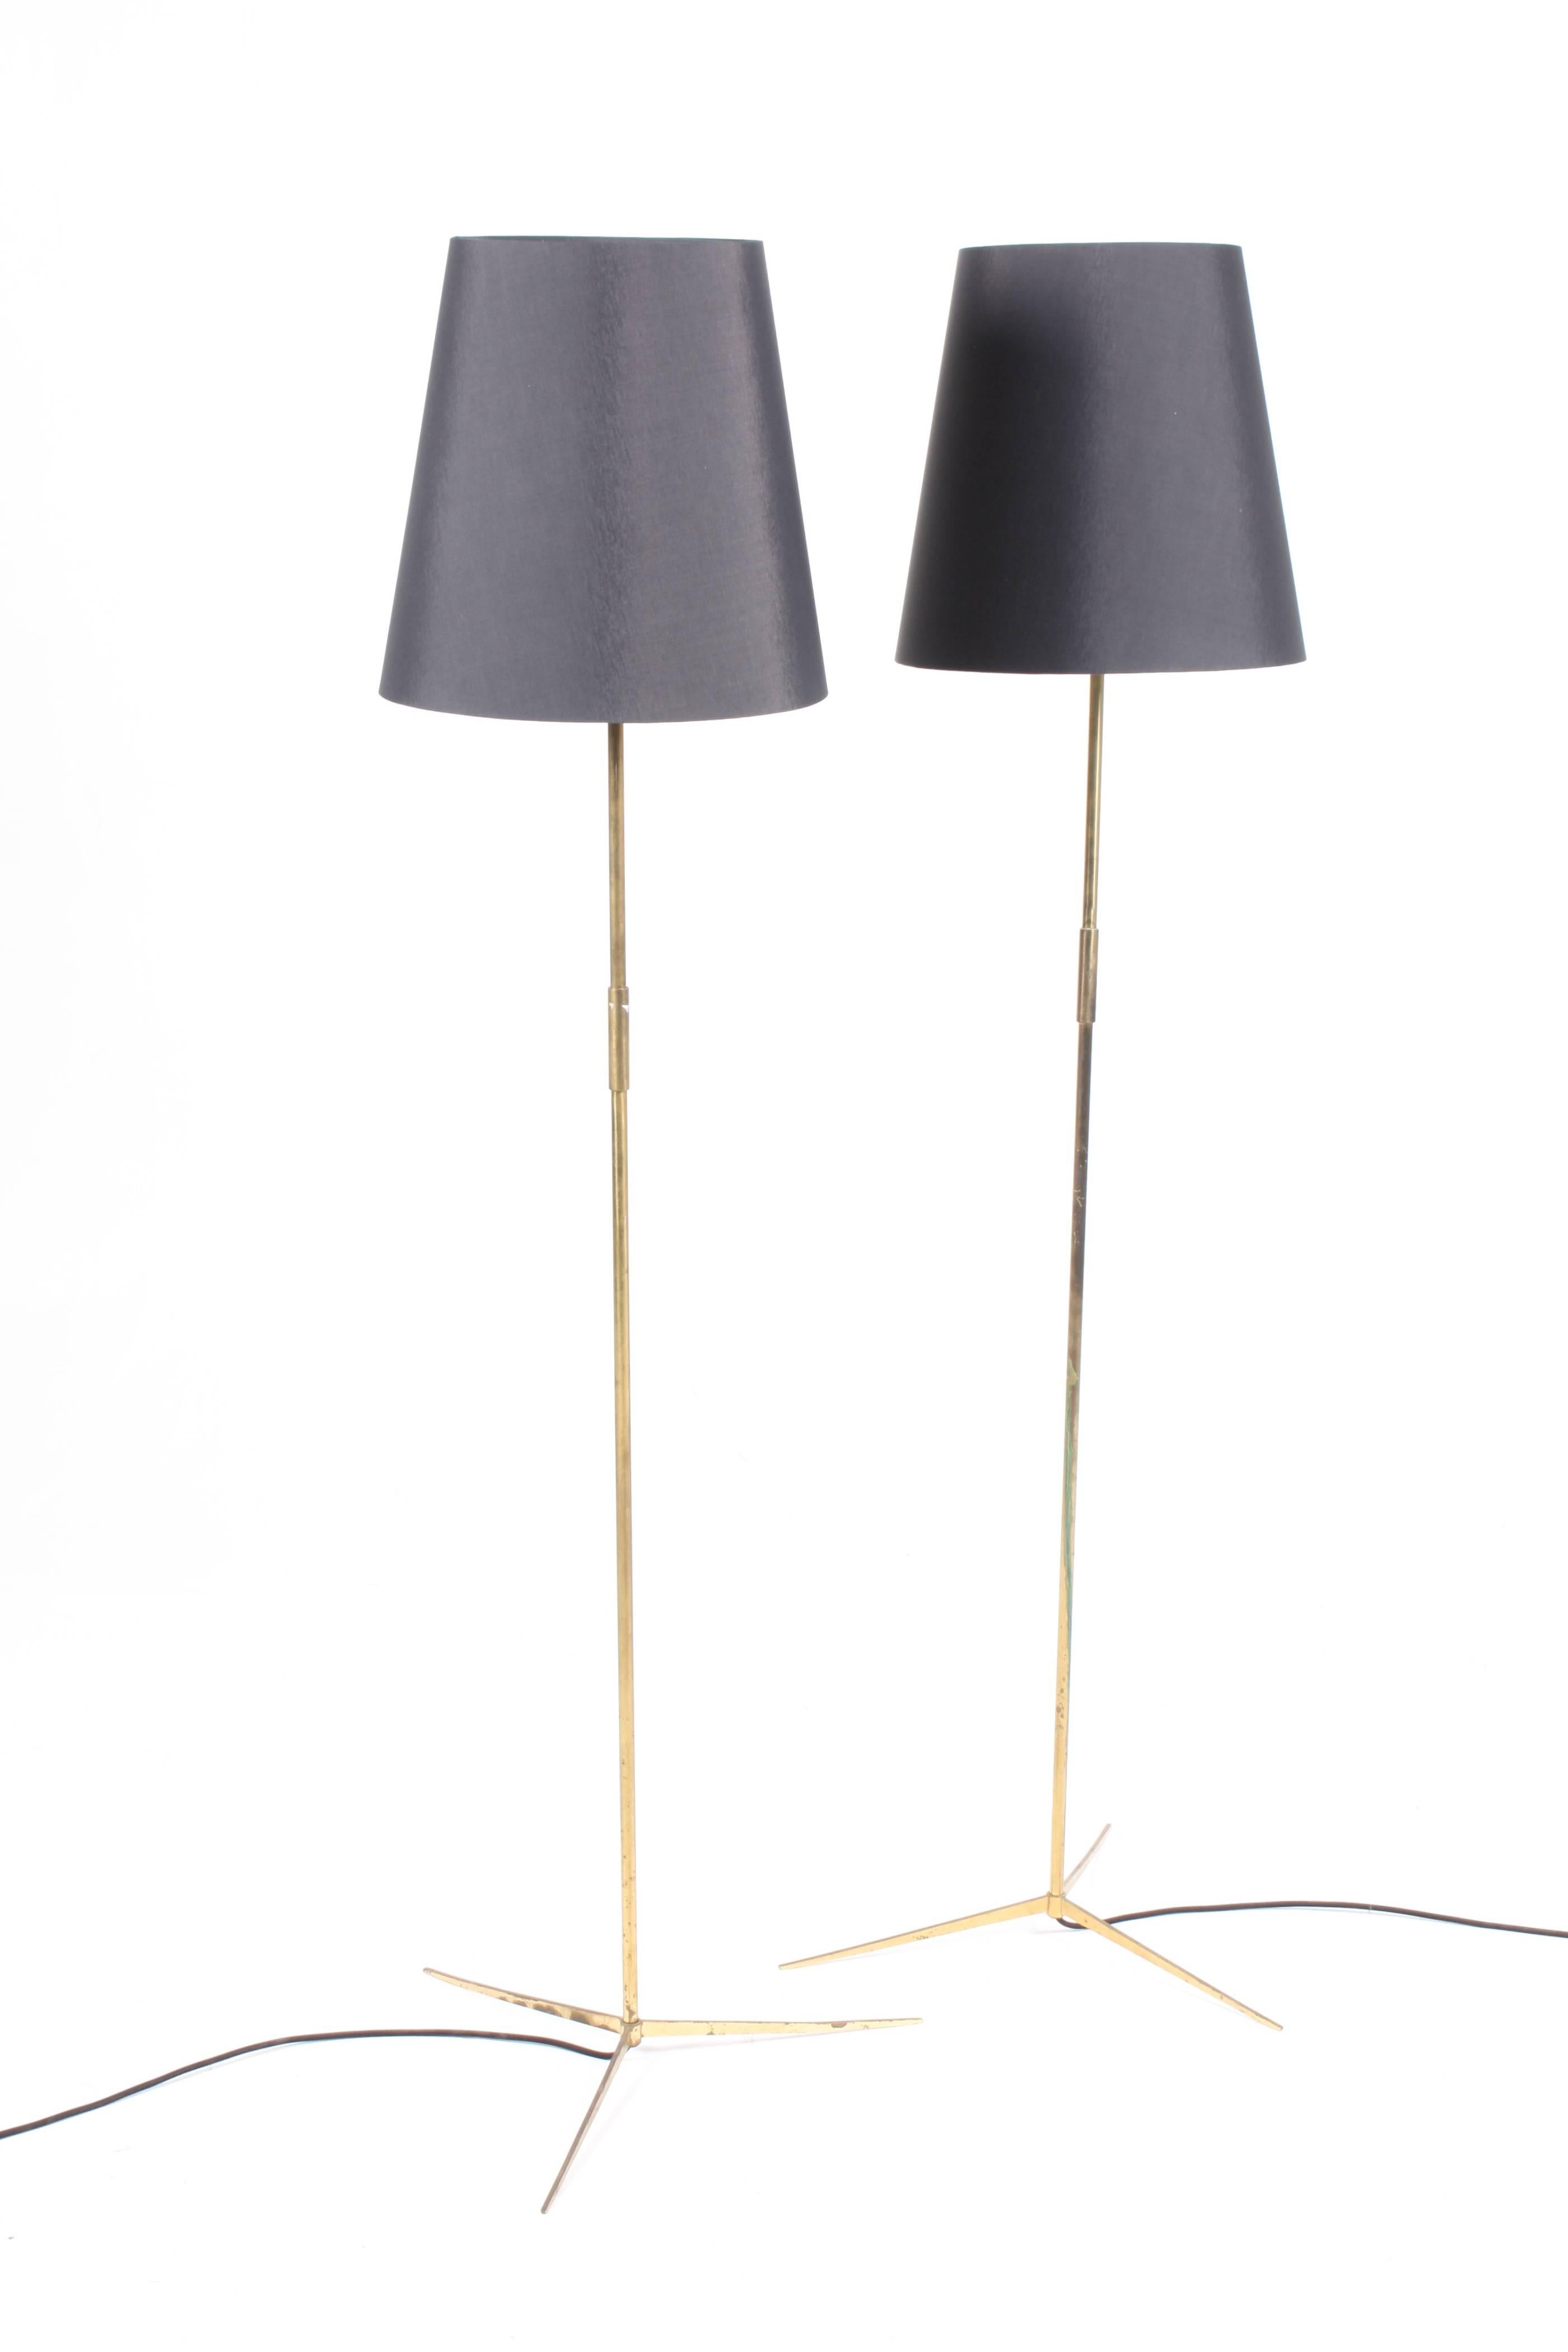 Pair of elegant height adjustable floor lamps in patinated brass. This lamp is a fine example of minimalistic Scandinavian design and quality. Made in Denmark, circa 1960.